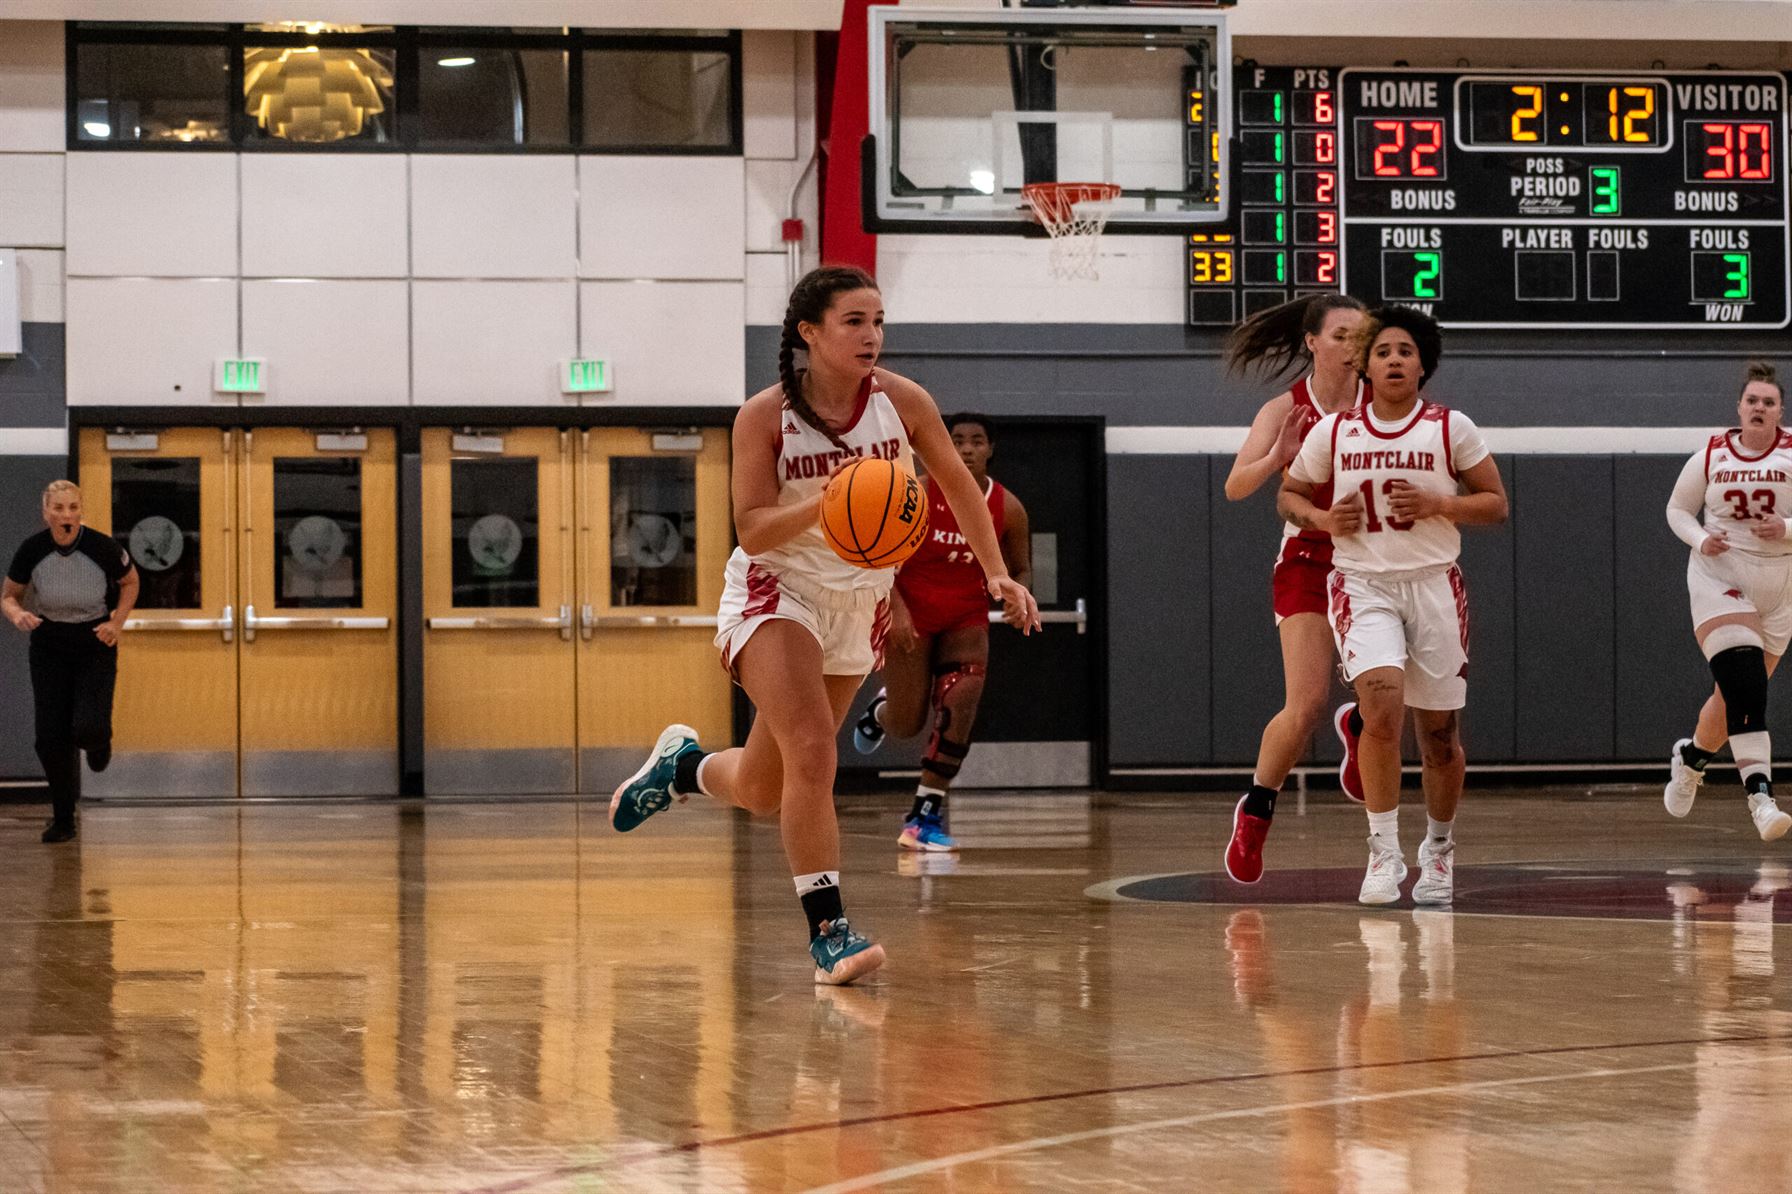 Sophomore guard Alexis Strollo pushing the pace against King's College. Danny Deronde | The Montclarion